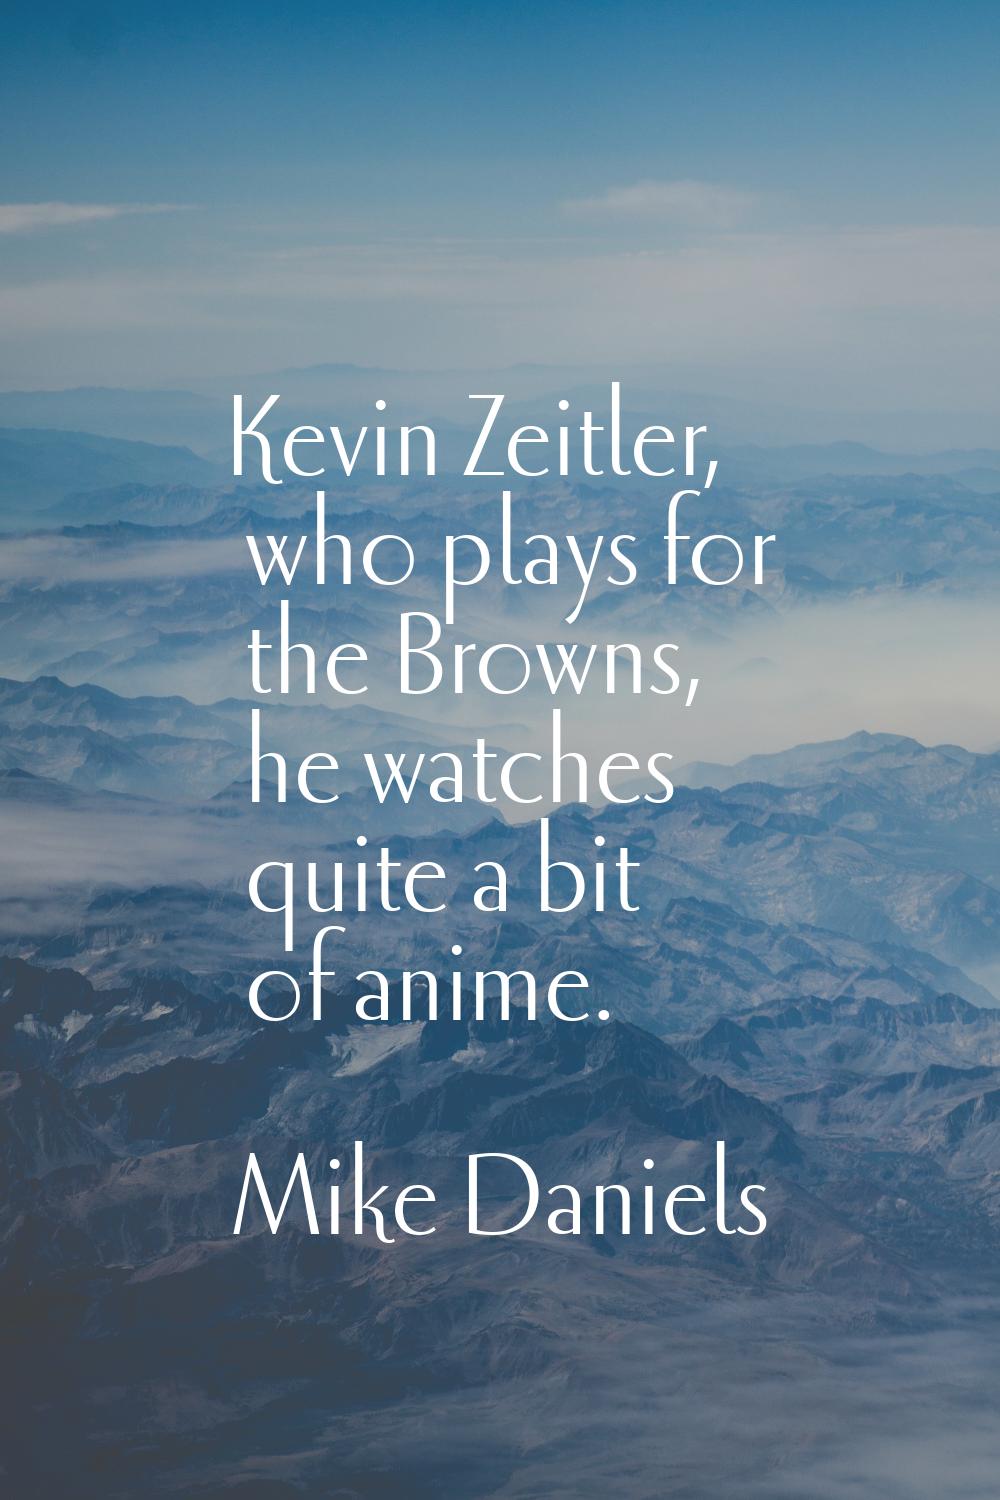 Kevin Zeitler, who plays for the Browns, he watches quite a bit of anime.